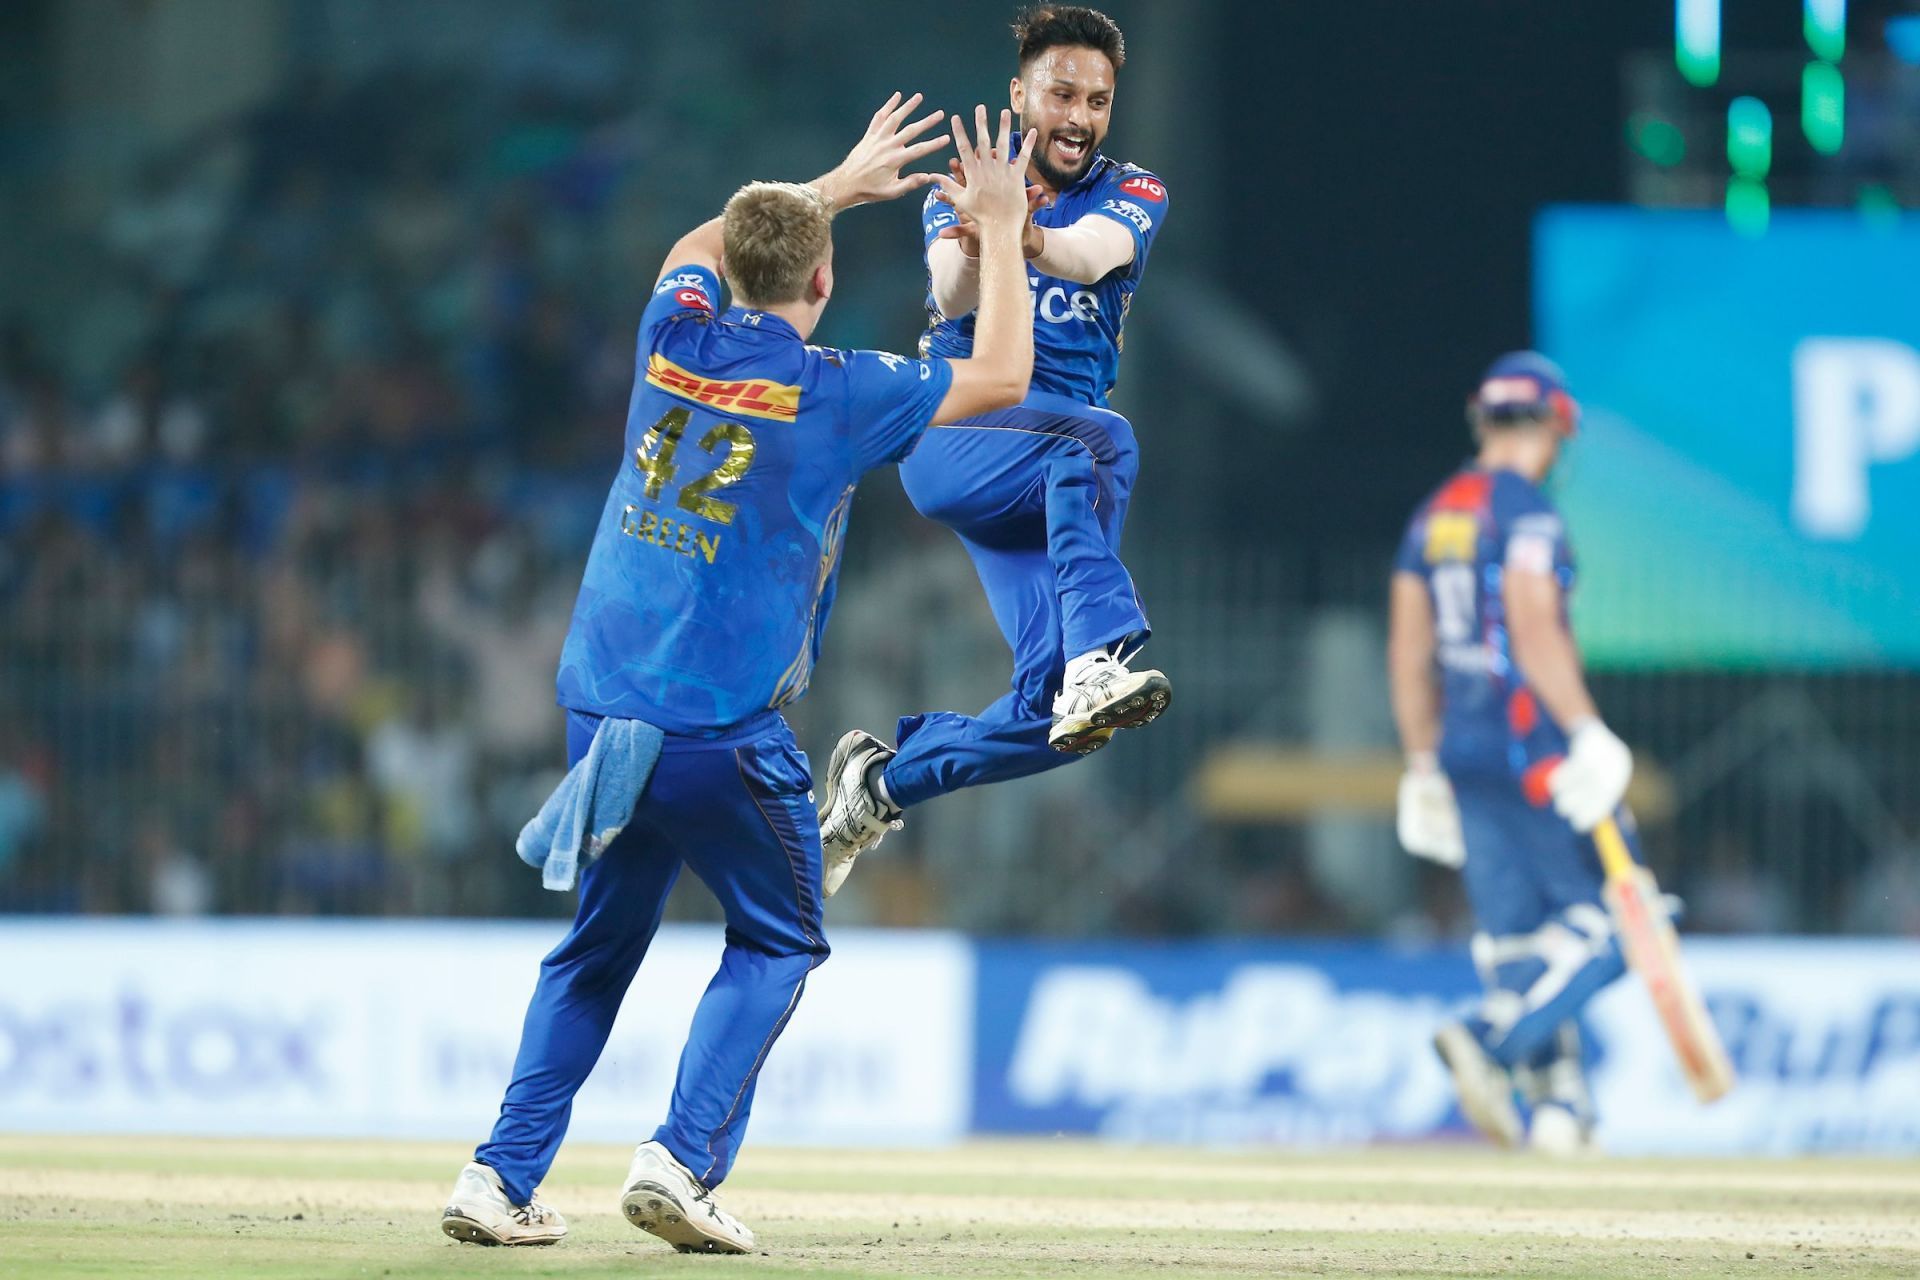 Akash Madhwal is now a big star with the Mumbai Indians [Image: IPL Twitter]